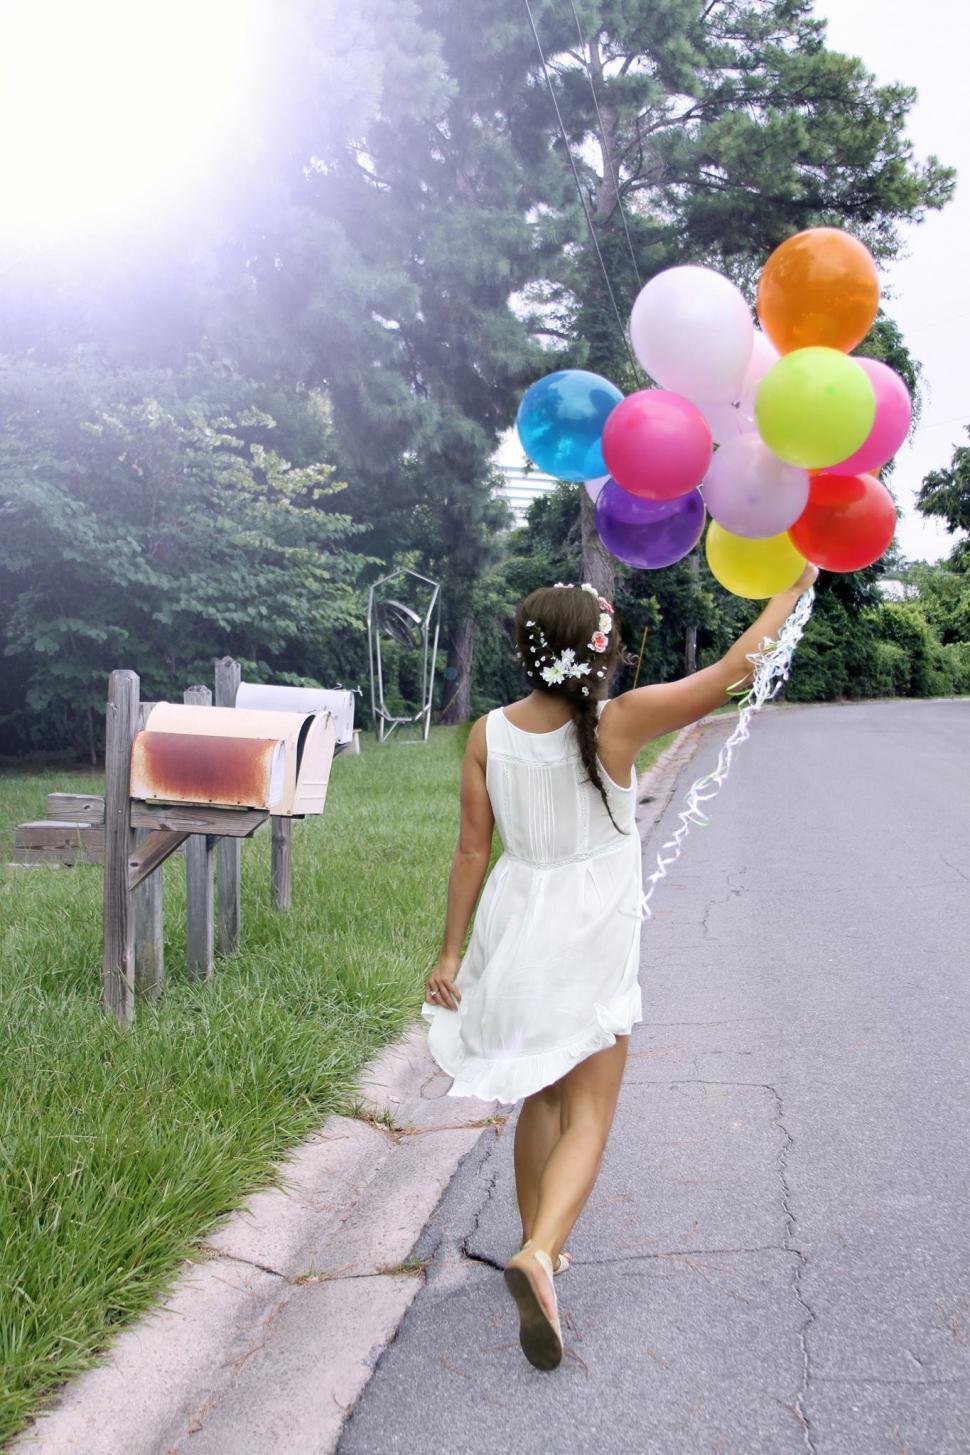 Free Image of Woman with balloons 